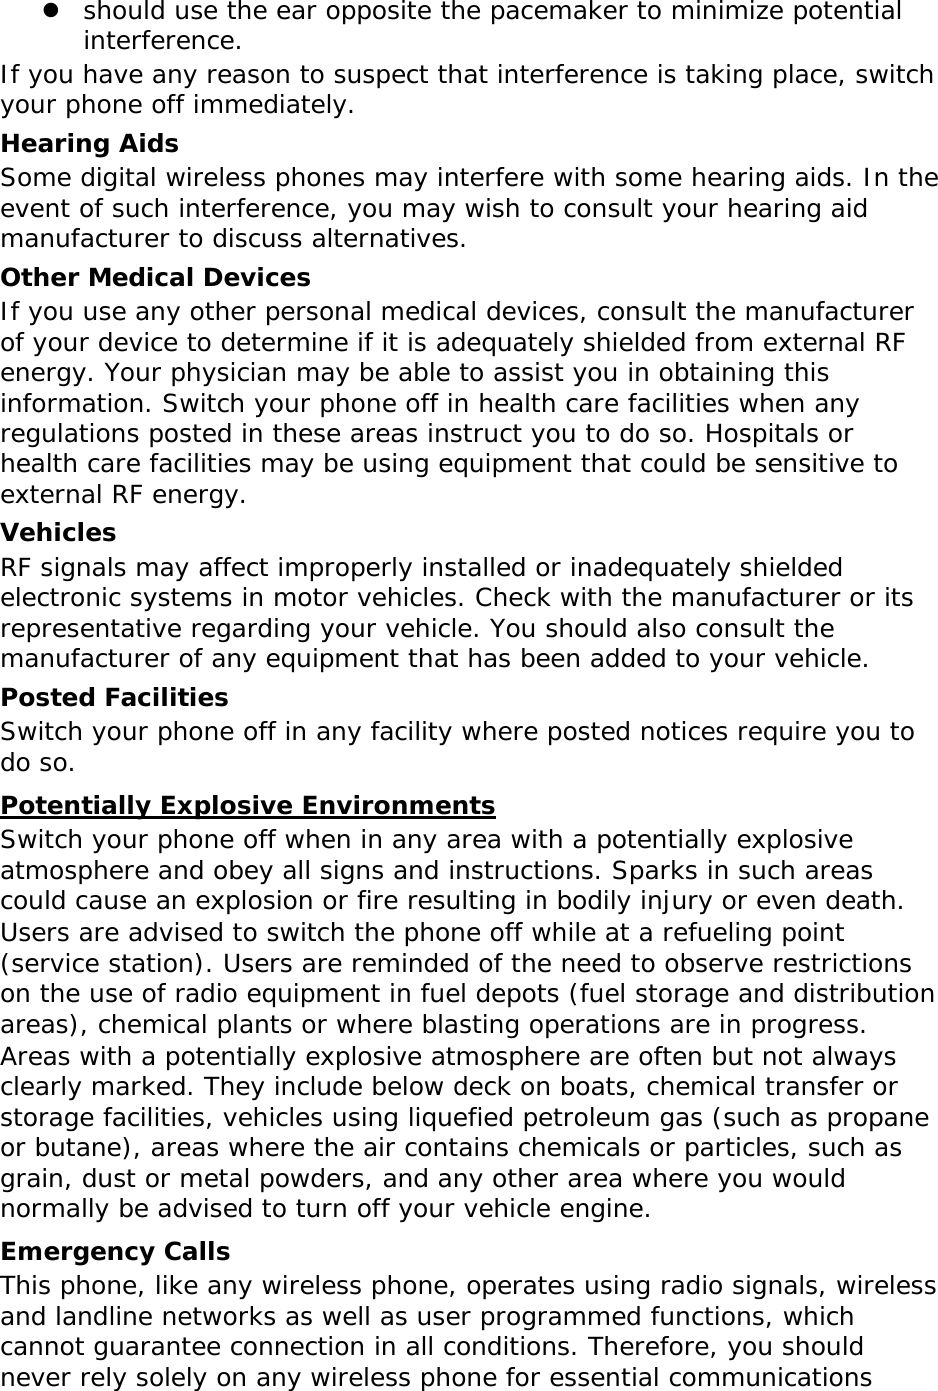  should use the ear opposite the pacemaker to minimize potential interference. If you have any reason to suspect that interference is taking place, switch your phone off immediately. Hearing Aids Some digital wireless phones may interfere with some hearing aids. In the event of such interference, you may wish to consult your hearing aid manufacturer to discuss alternatives. Other Medical Devices If you use any other personal medical devices, consult the manufacturer of your device to determine if it is adequately shielded from external RF energy. Your physician may be able to assist you in obtaining this information. Switch your phone off in health care facilities when any regulations posted in these areas instruct you to do so. Hospitals or health care facilities may be using equipment that could be sensitive to external RF energy. Vehicles RF signals may affect improperly installed or inadequately shielded electronic systems in motor vehicles. Check with the manufacturer or its representative regarding your vehicle. You should also consult the manufacturer of any equipment that has been added to your vehicle. Posted Facilities Switch your phone off in any facility where posted notices require you to do so. Potentially Explosive Environments Switch your phone off when in any area with a potentially explosive atmosphere and obey all signs and instructions. Sparks in such areas could cause an explosion or fire resulting in bodily injury or even death. Users are advised to switch the phone off while at a refueling point (service station). Users are reminded of the need to observe restrictions on the use of radio equipment in fuel depots (fuel storage and distribution areas), chemical plants or where blasting operations are in progress. Areas with a potentially explosive atmosphere are often but not always clearly marked. They include below deck on boats, chemical transfer or storage facilities, vehicles using liquefied petroleum gas (such as propane or butane), areas where the air contains chemicals or particles, such as grain, dust or metal powders, and any other area where you would normally be advised to turn off your vehicle engine. Emergency Calls This phone, like any wireless phone, operates using radio signals, wireless and landline networks as well as user programmed functions, which cannot guarantee connection in all conditions. Therefore, you should never rely solely on any wireless phone for essential communications 